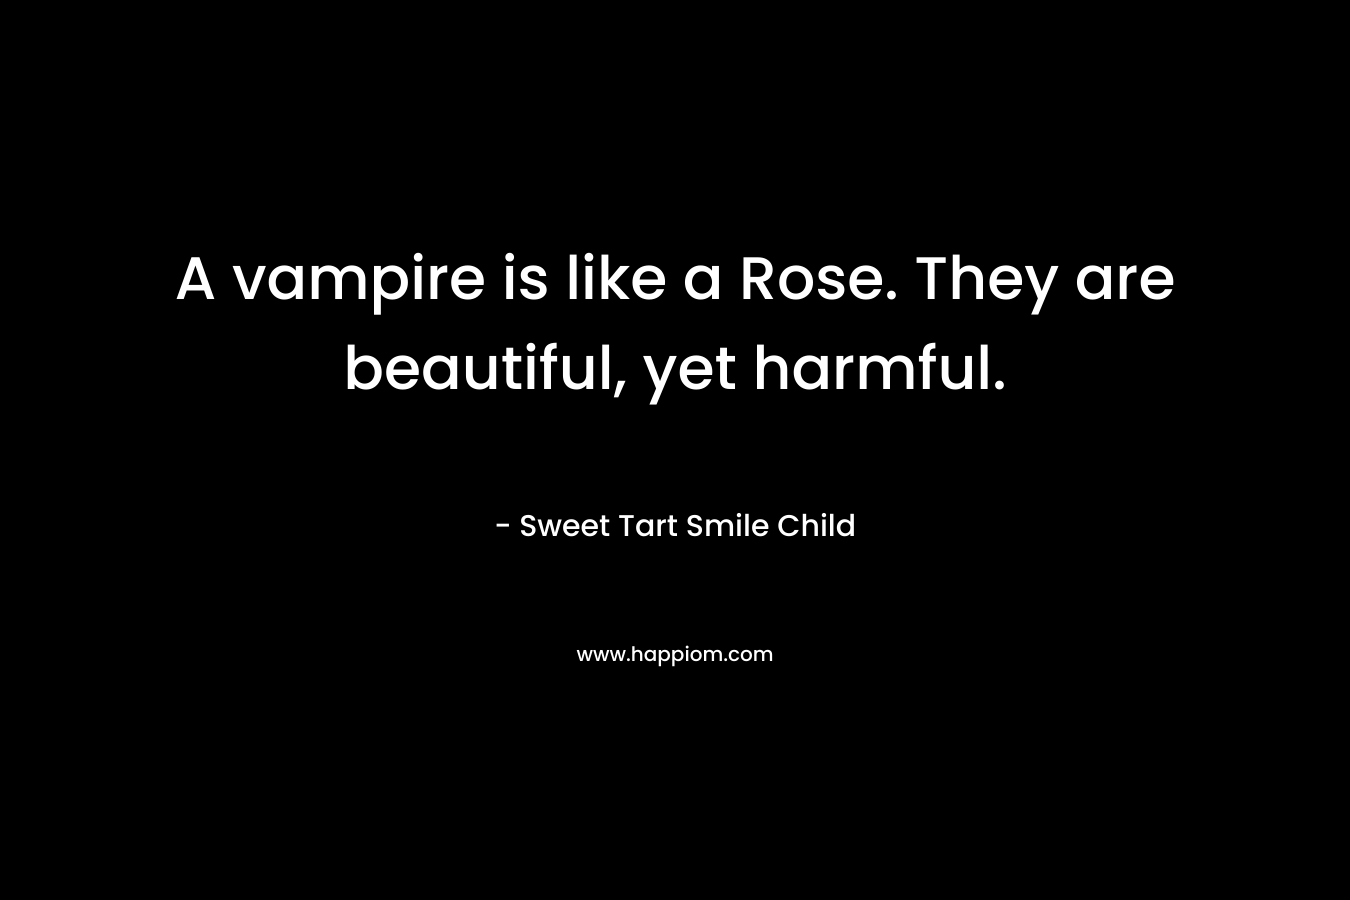 A vampire is like a Rose. They are beautiful, yet harmful.